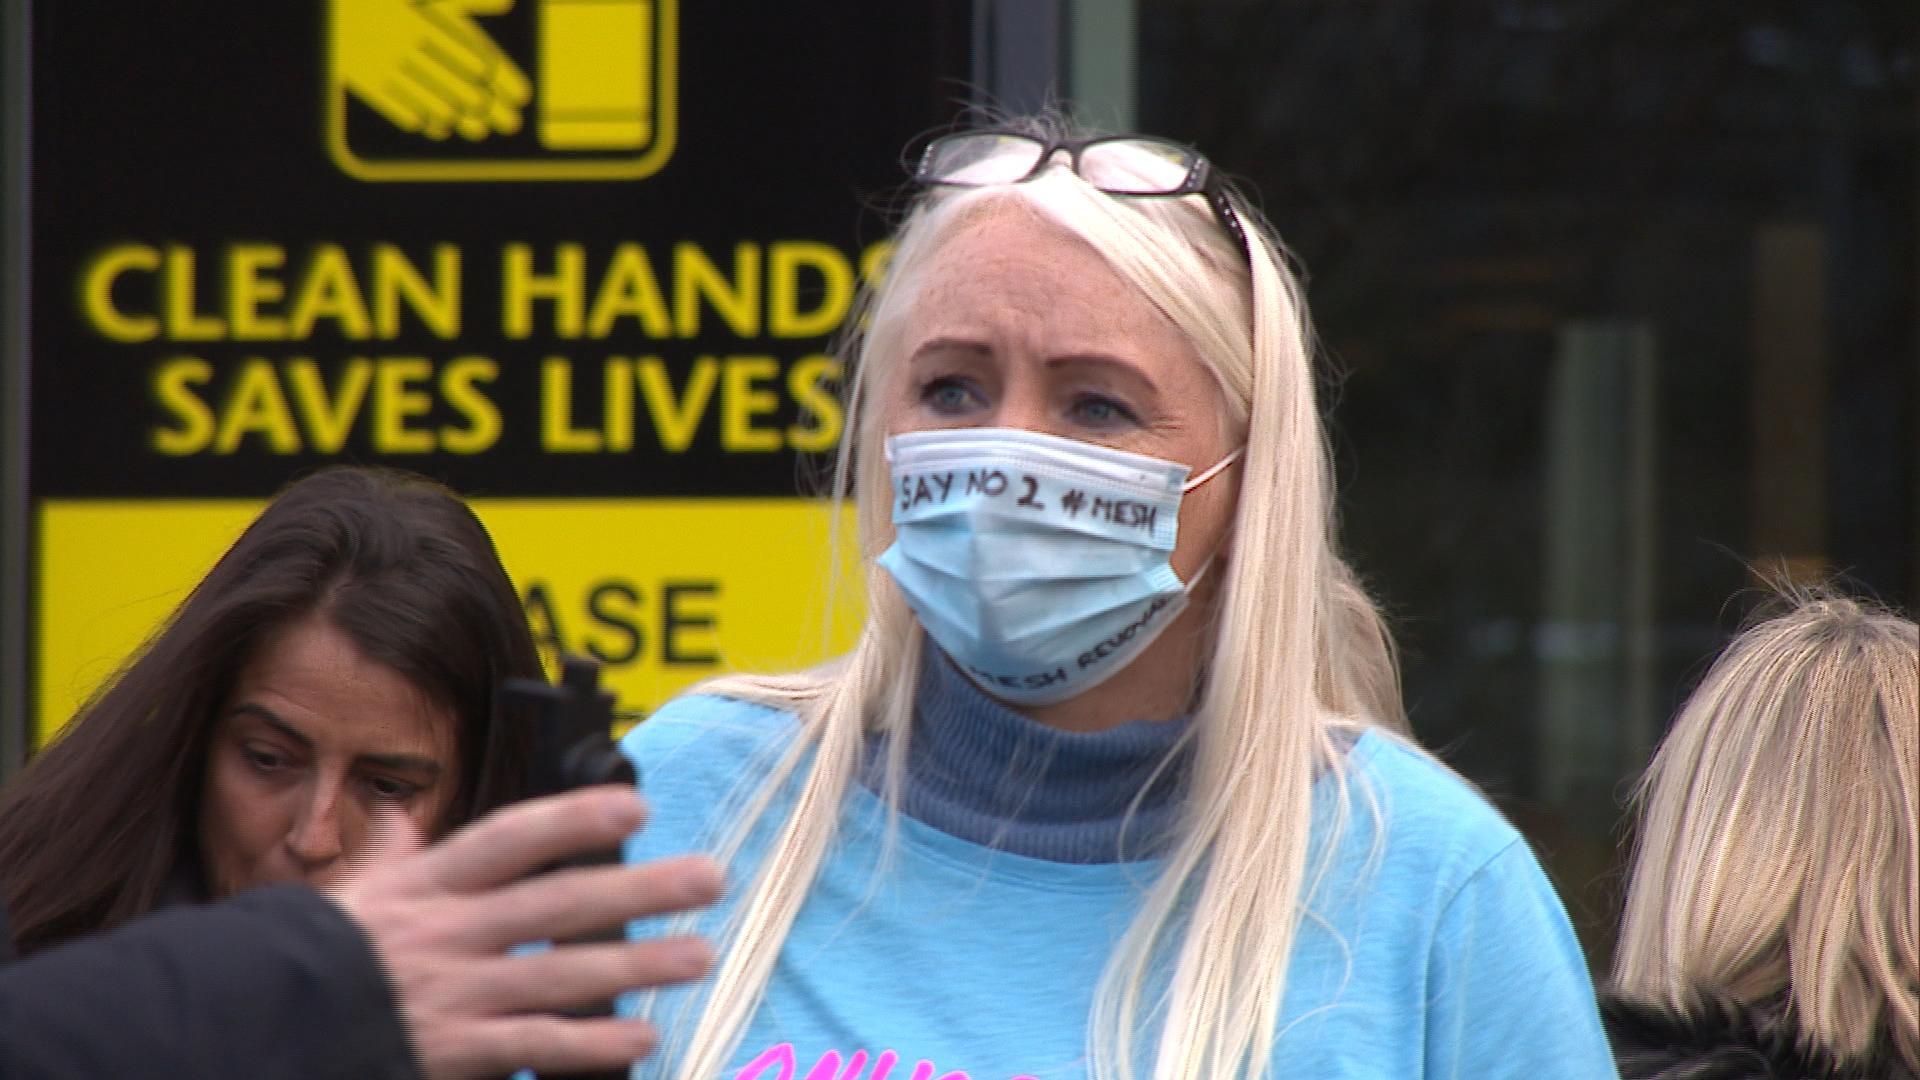 Nancy Honeyball took part in a mesh survivors protest in 2021.